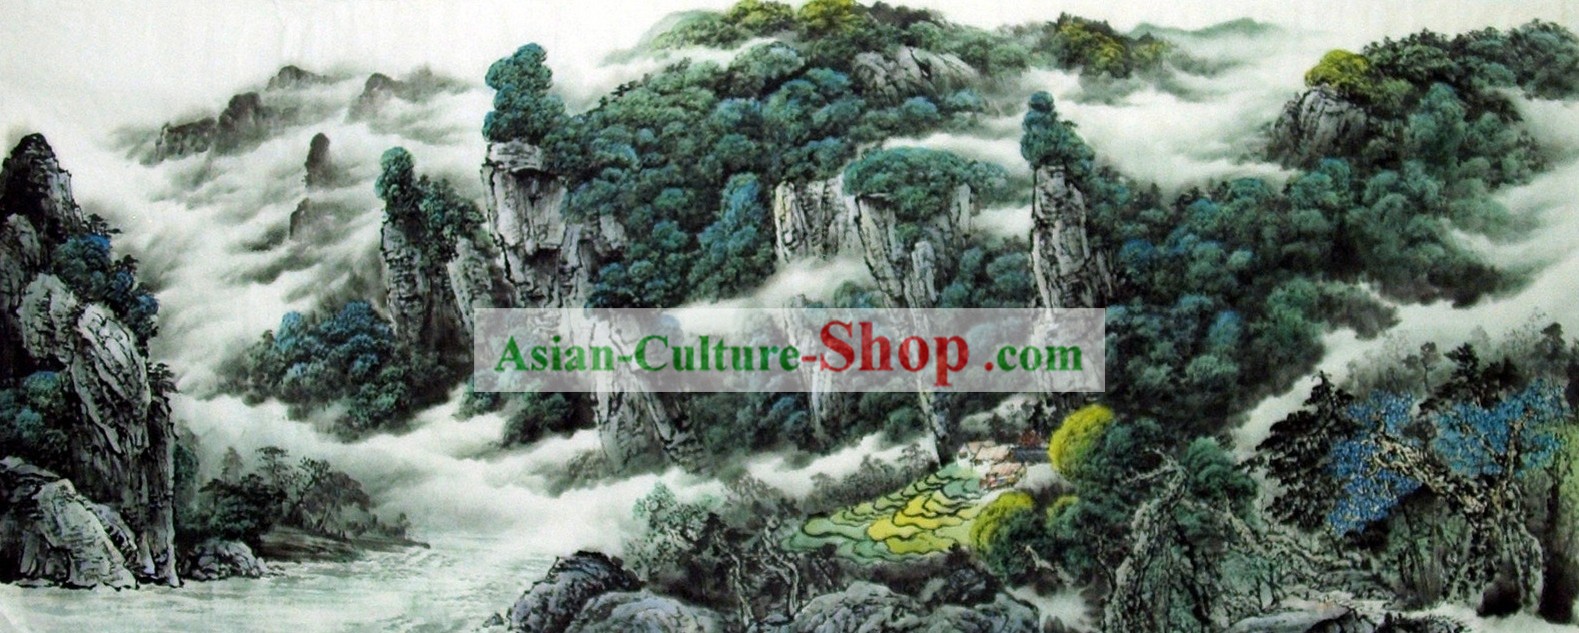 Chinese Landscape Painting - Guilin Scene